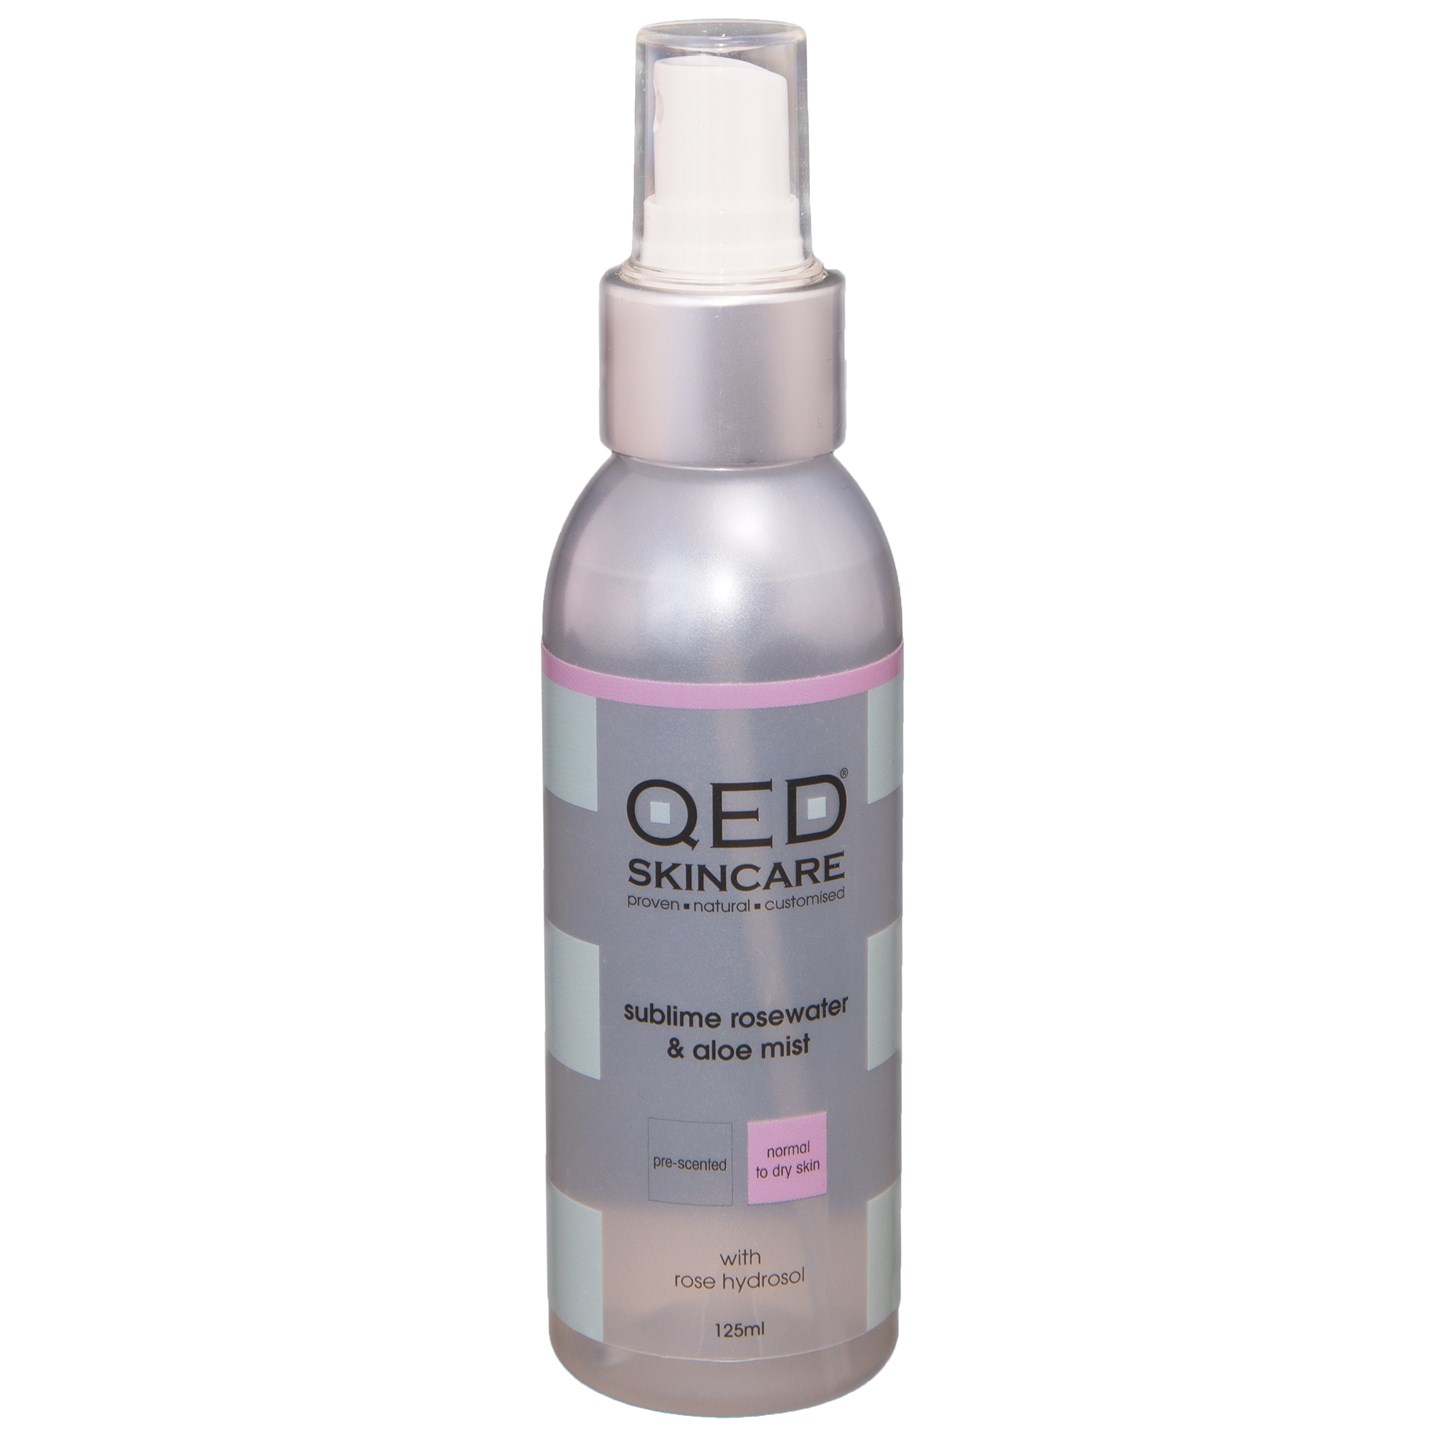 QED Sublime Rosewater and Aloe Mist 125ml